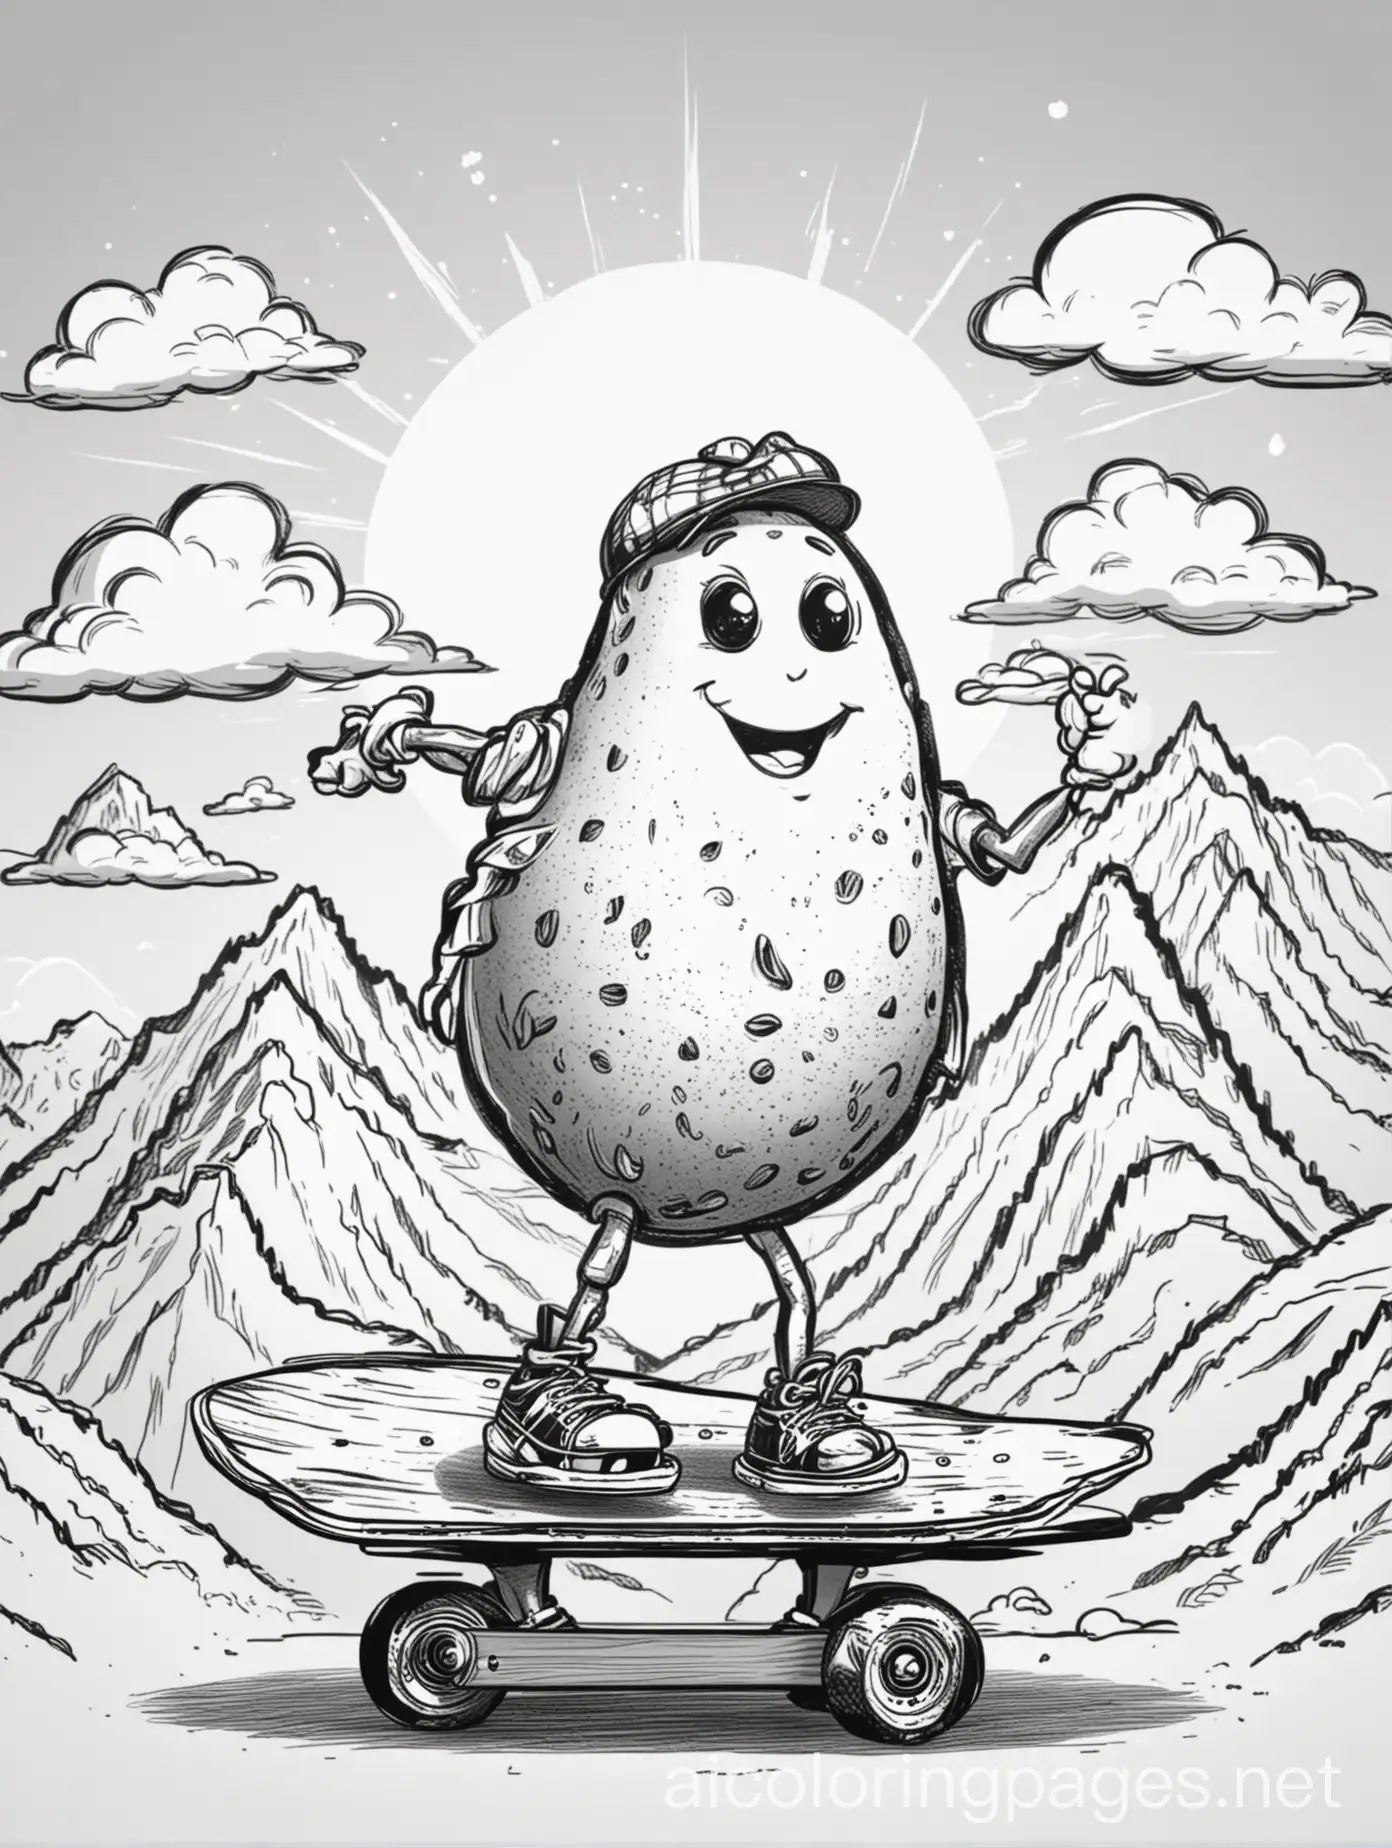 a potato jumping on to a skateboard, in cartoon style. with a sun, mountains, and clouds in the background, Coloring Page, black and white, line art, white background, Simplicity, Ample White Space. The background of the coloring page is plain white to make it easy for young children to color within the lines. The outlines of all the subjects are easy to distinguish, making it simple for kids to color without too much difficulty